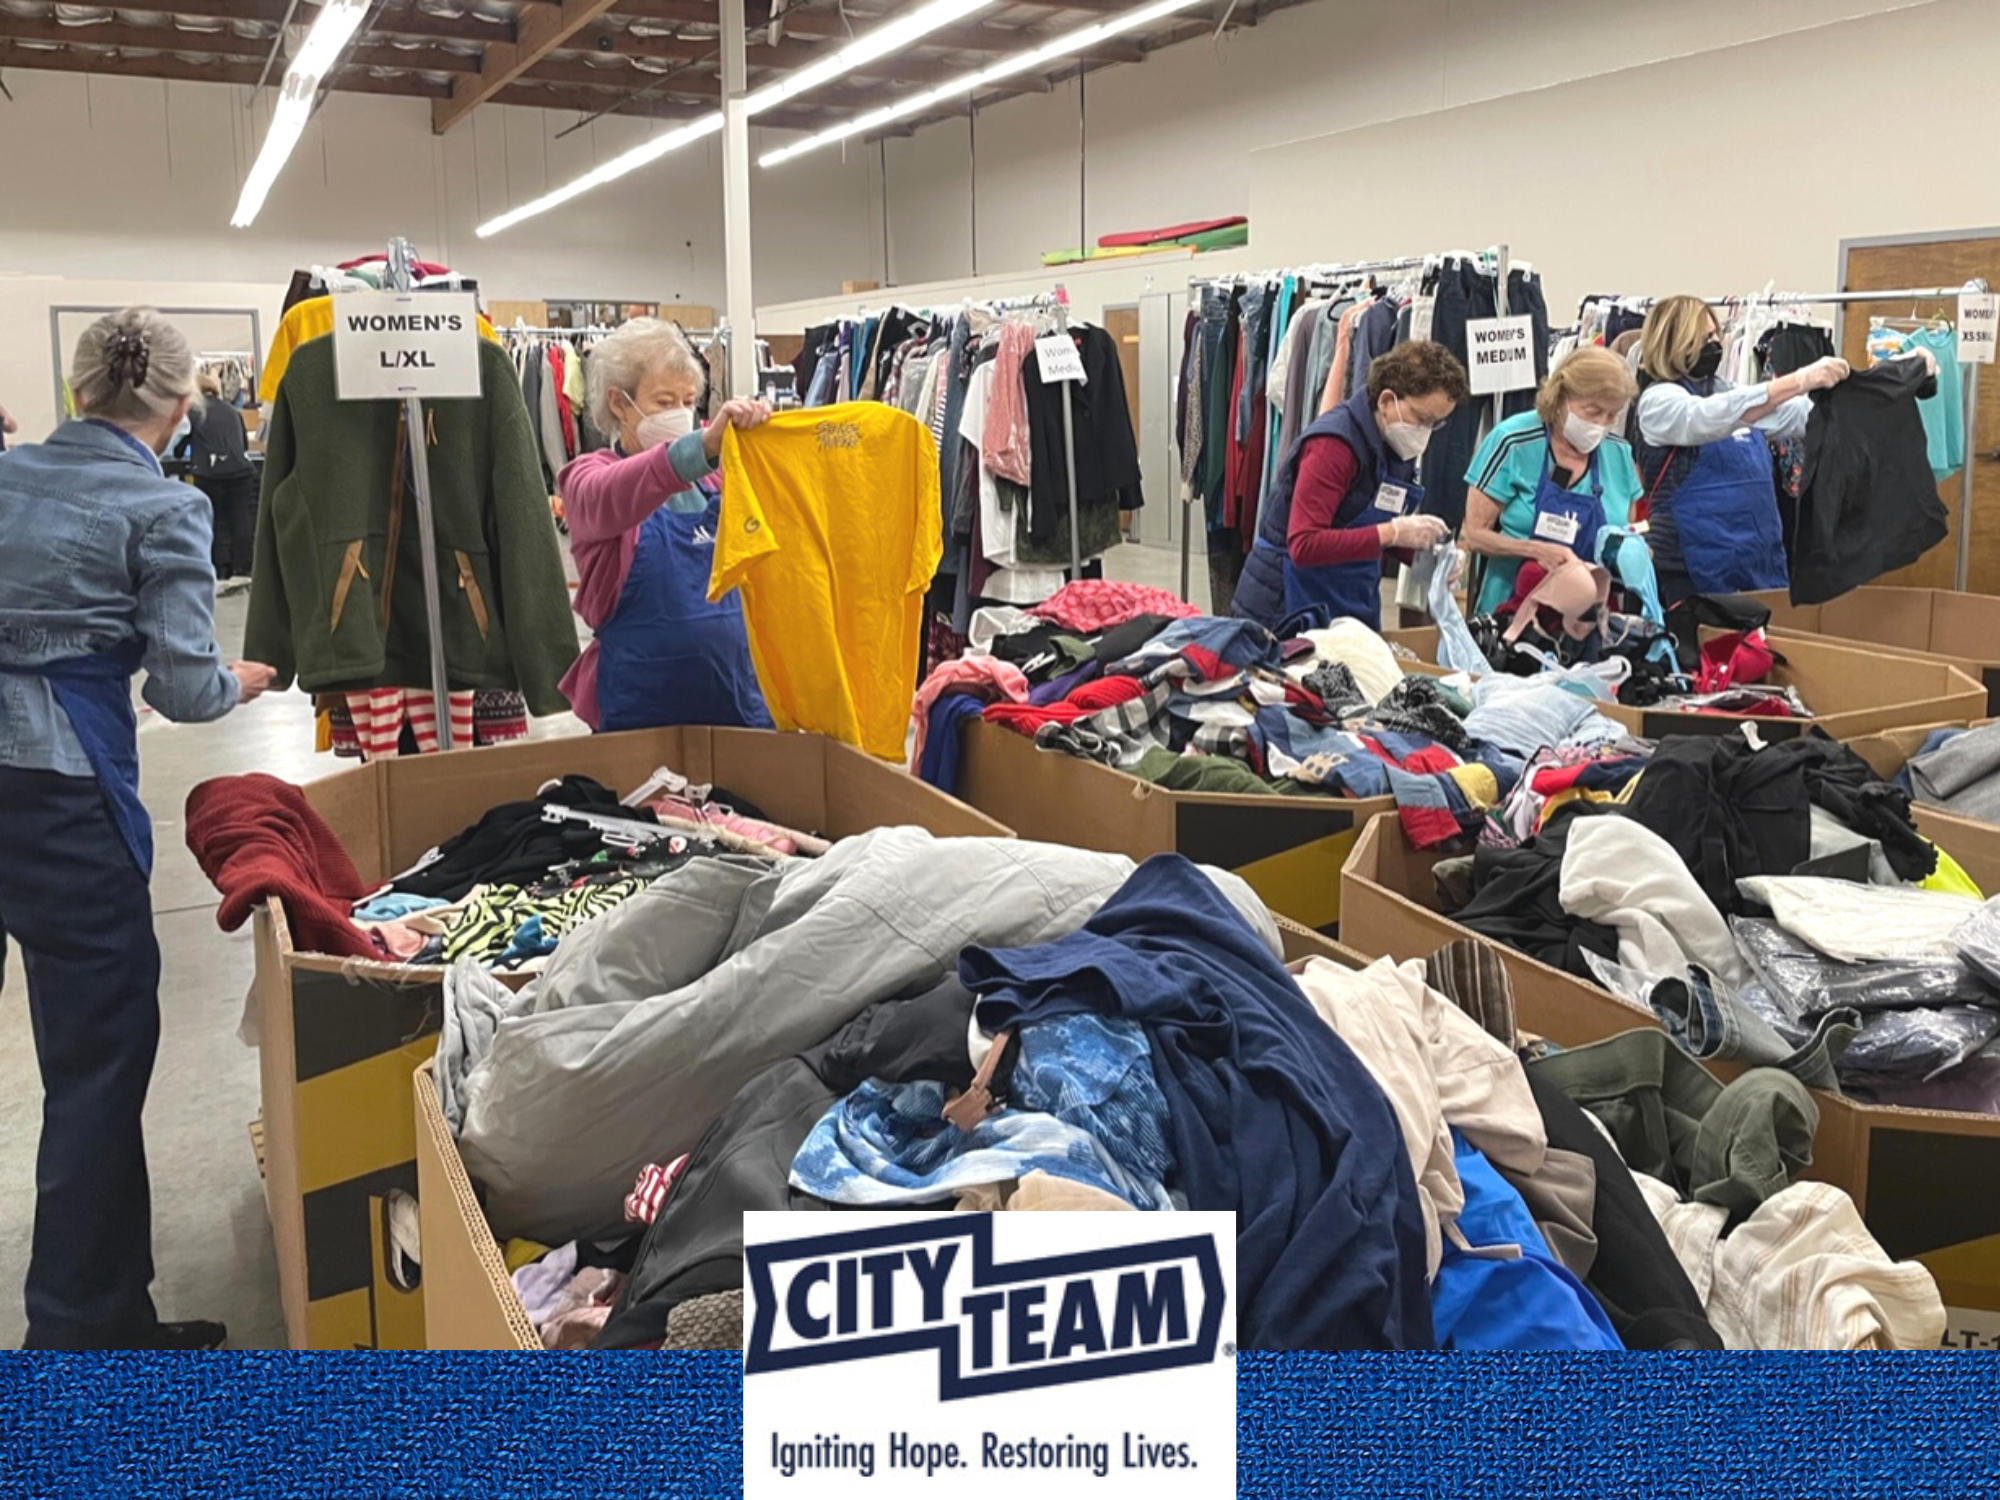 Sorting Donated Clothing at CityTeam